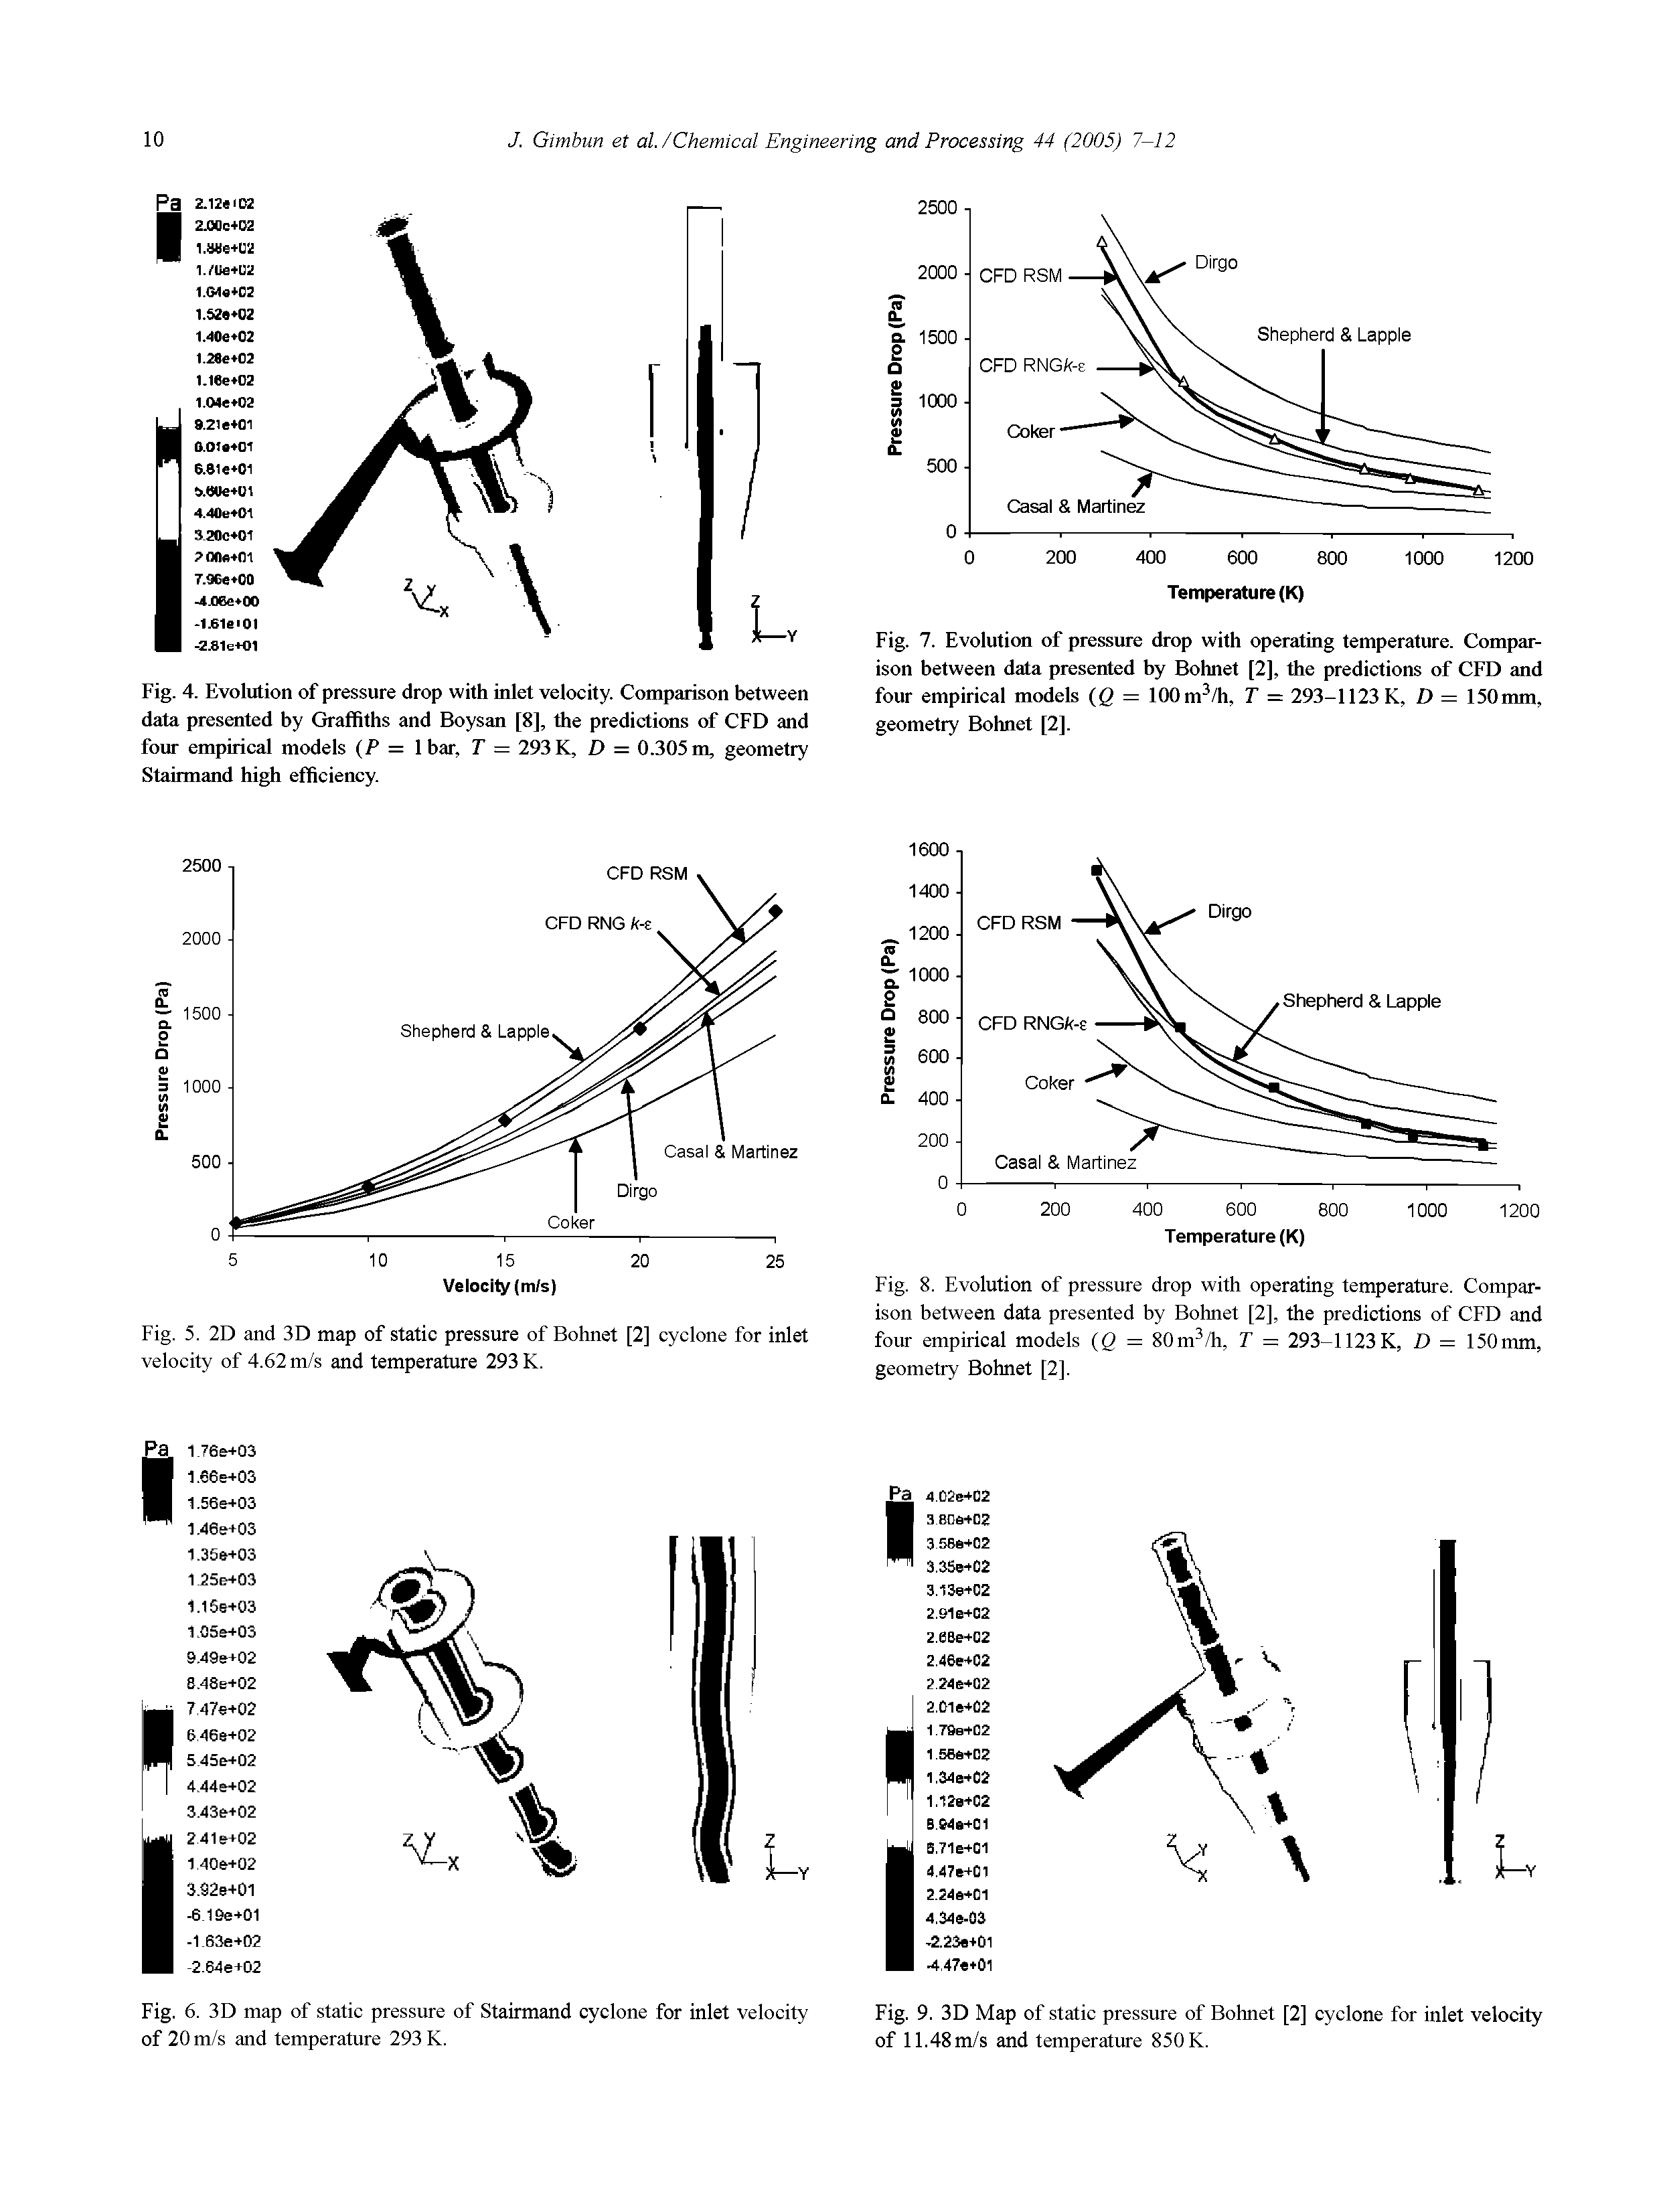 Fig. 7. Evolution of pressure drop with operating temperature. Comparison between data presented by Bohnet [2], the predictions of CFD and four empirical models (Q = 100m3/h, T = 293-1123 K, D = 150mm, geometry Bohnet [2].